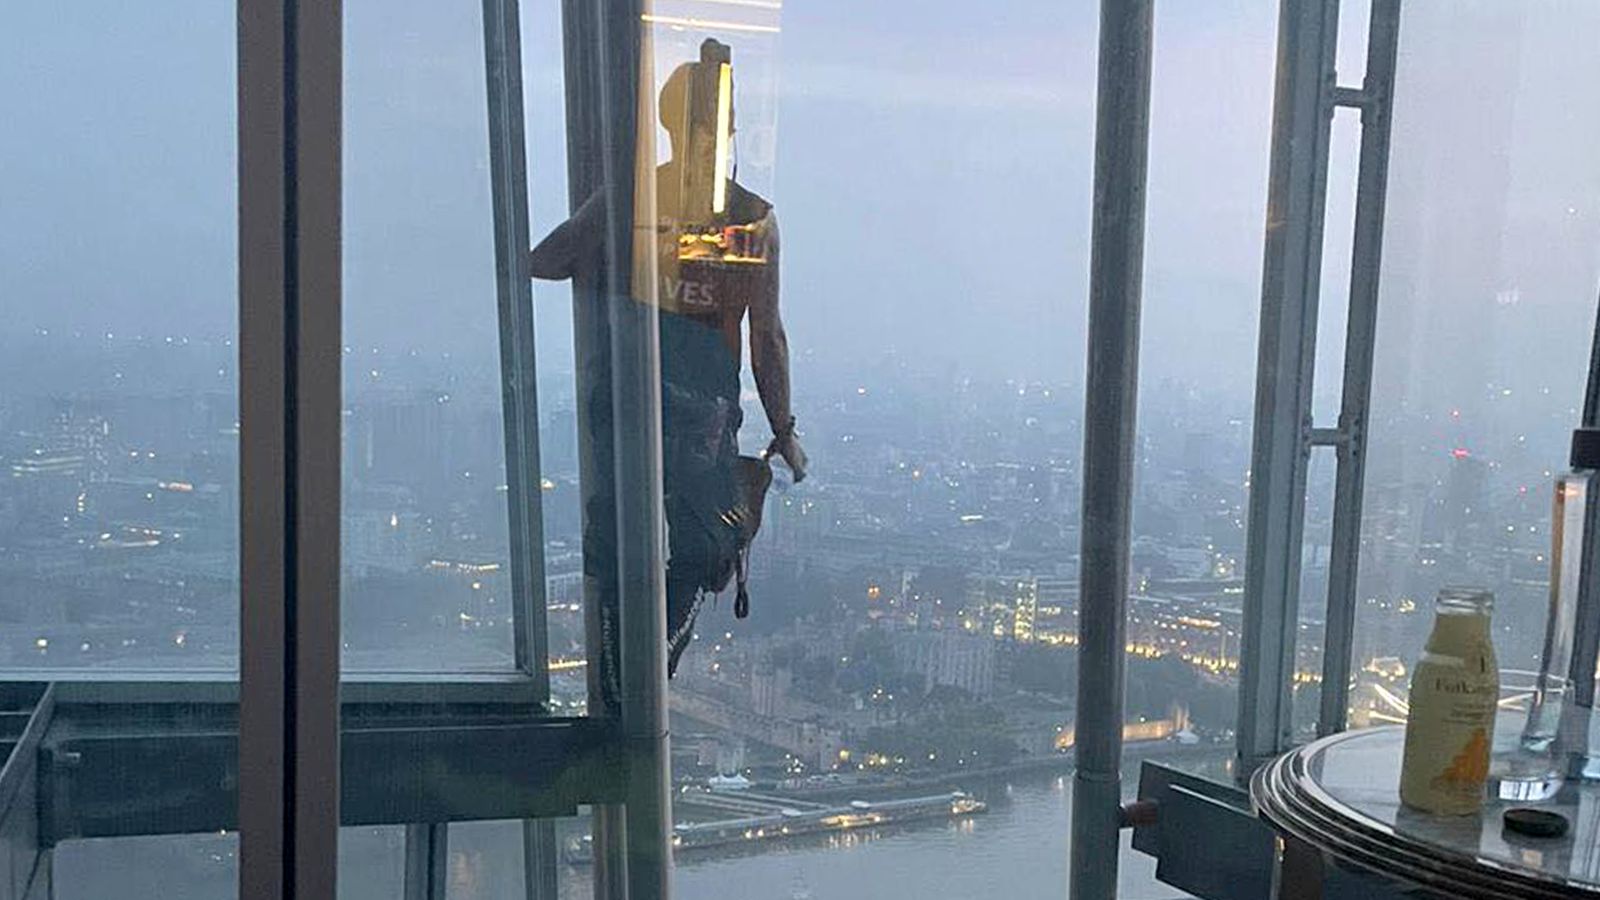 Climber scales The Shard barefoot and surprises couple staying on 40th floor of skyscraper | UK News